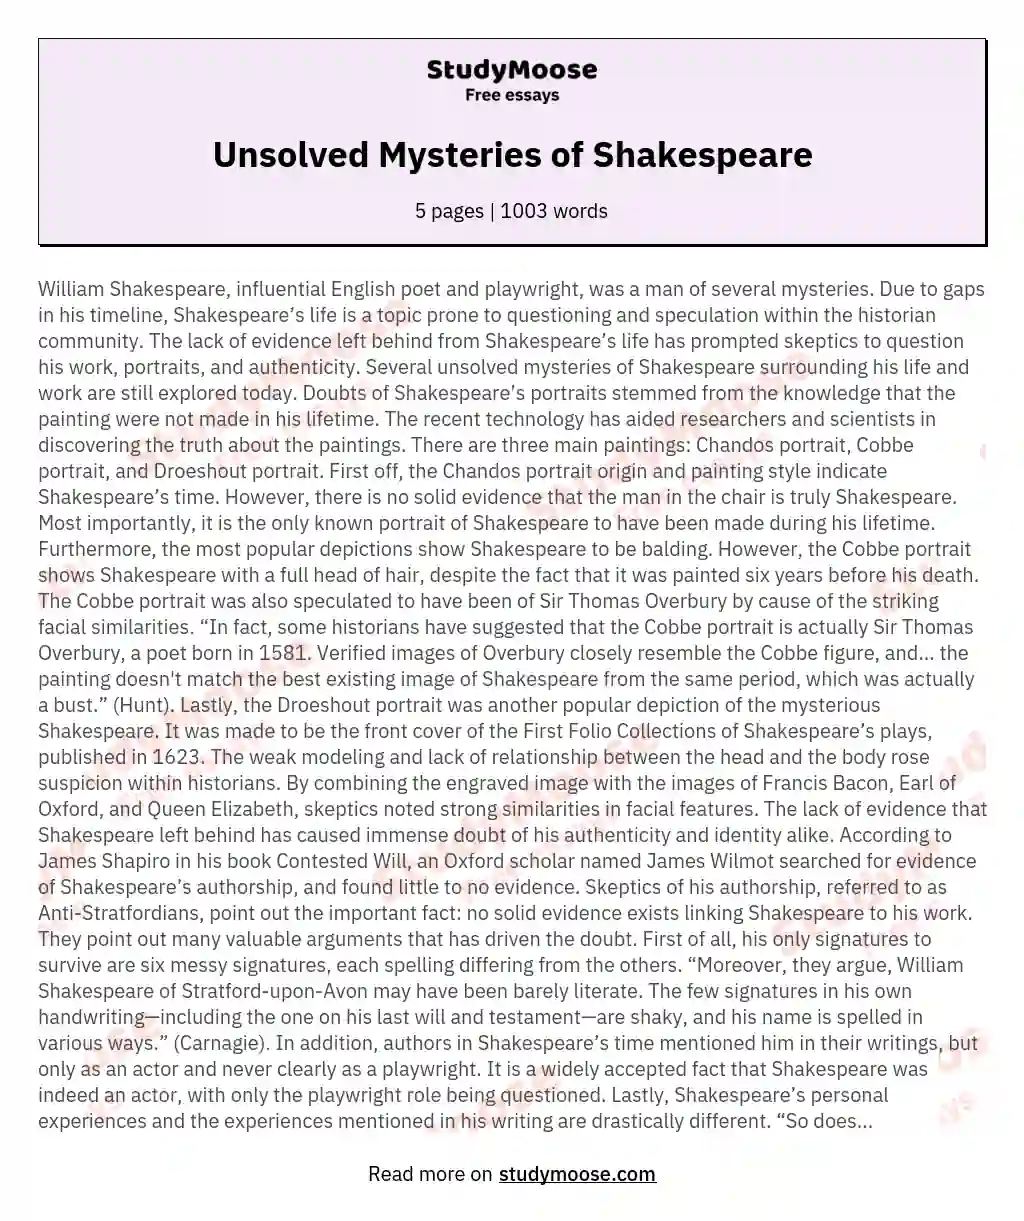 Unsolved Mysteries of Shakespeare